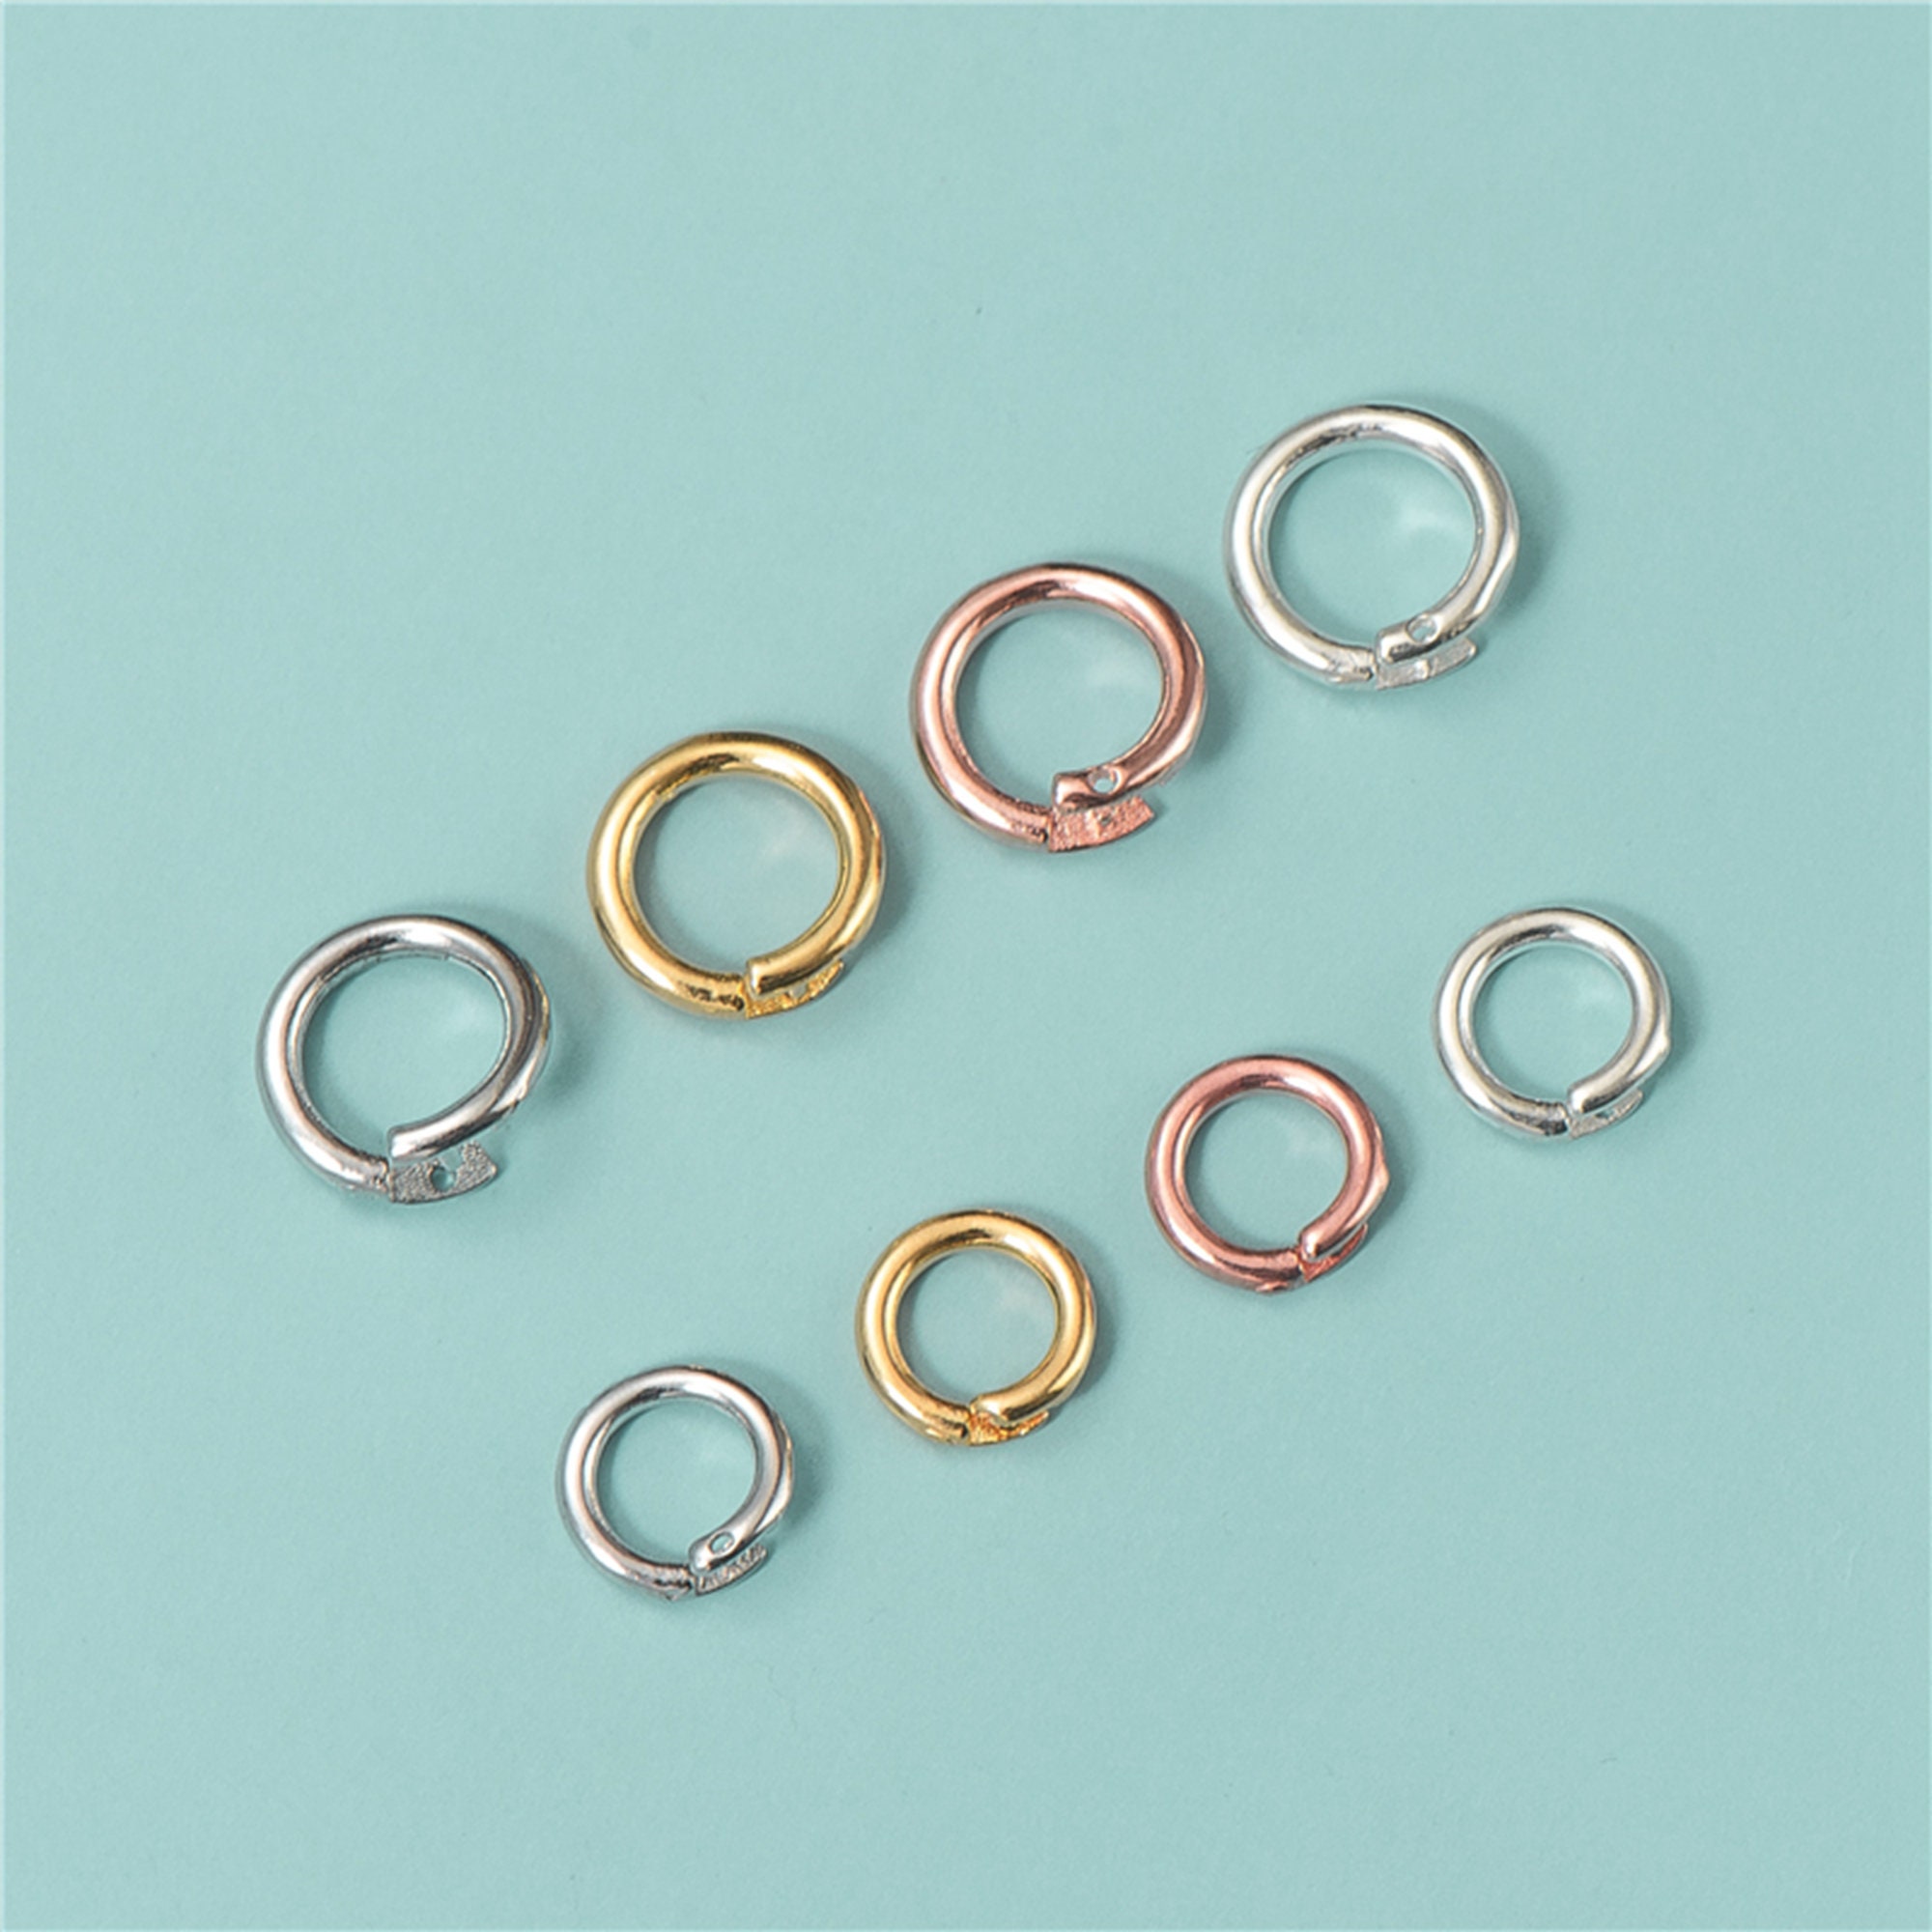 Jump ring, sterling silver, 14mm soldered round, 8.8mm inside